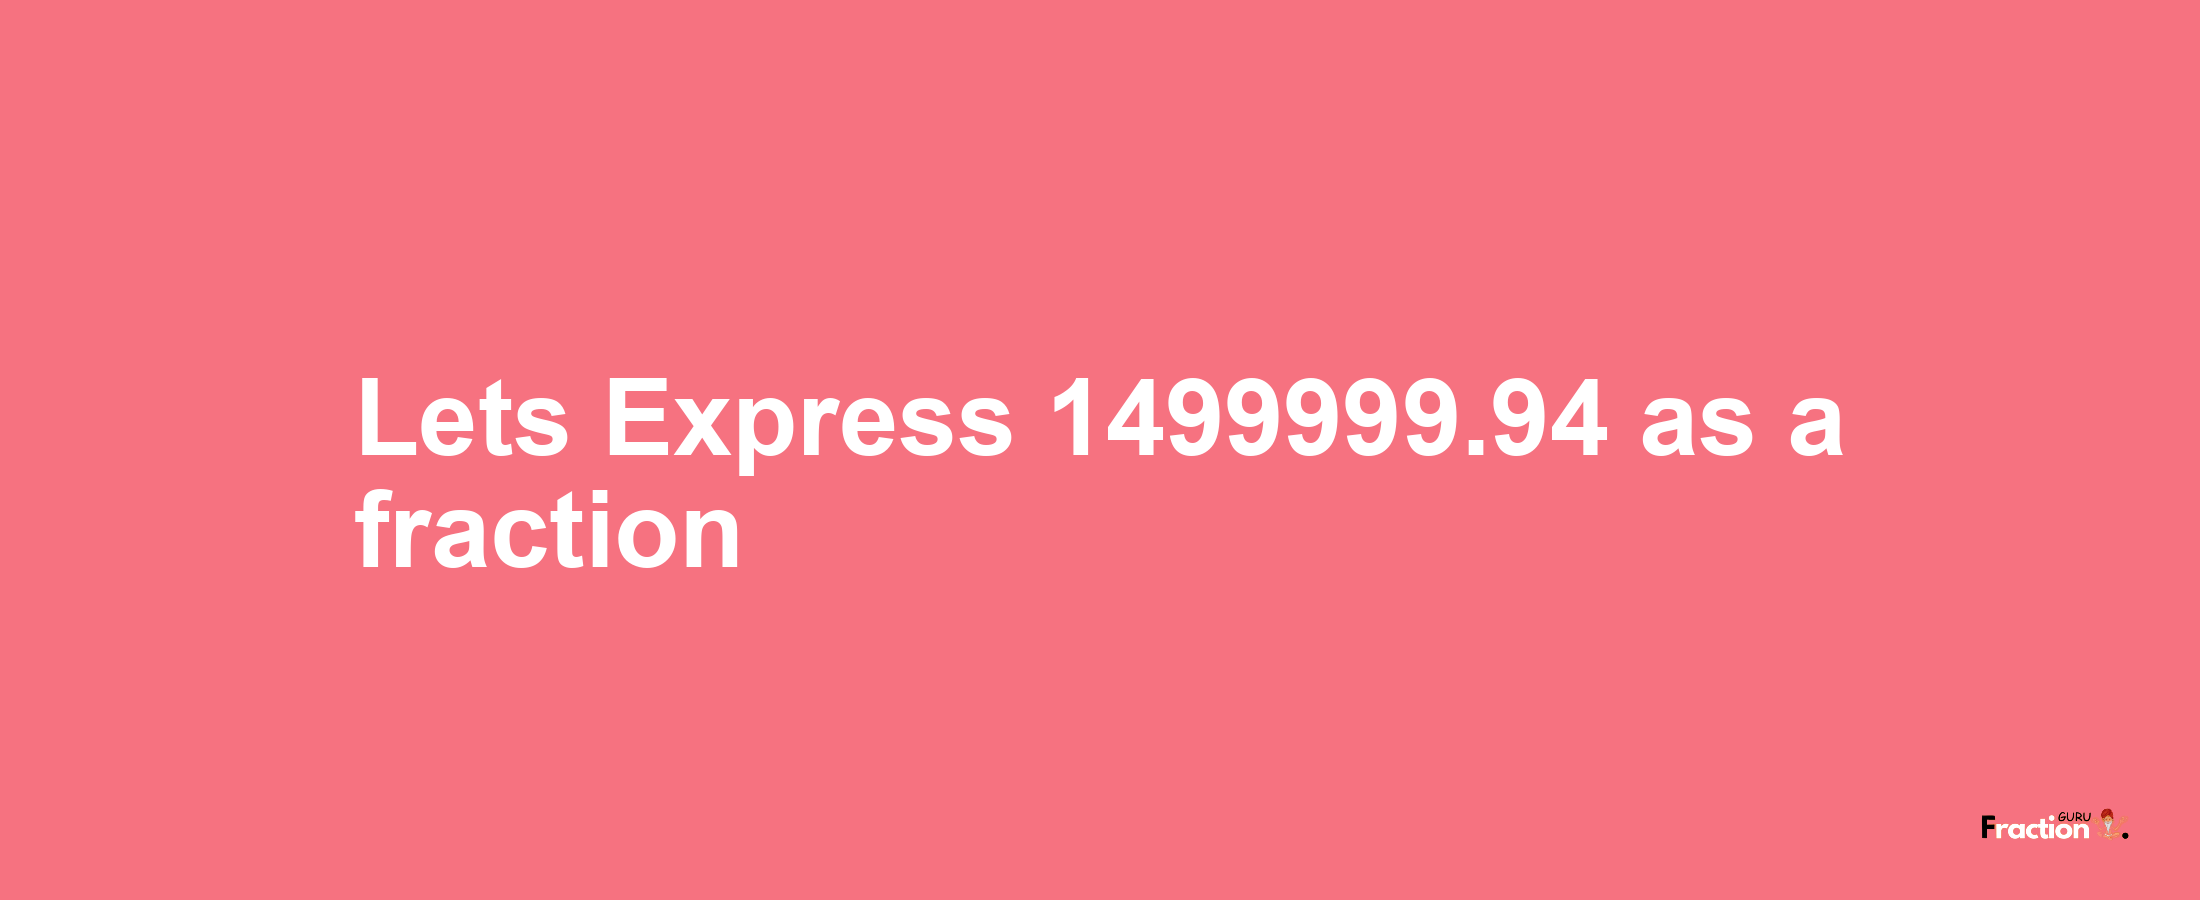 Lets Express 1499999.94 as afraction